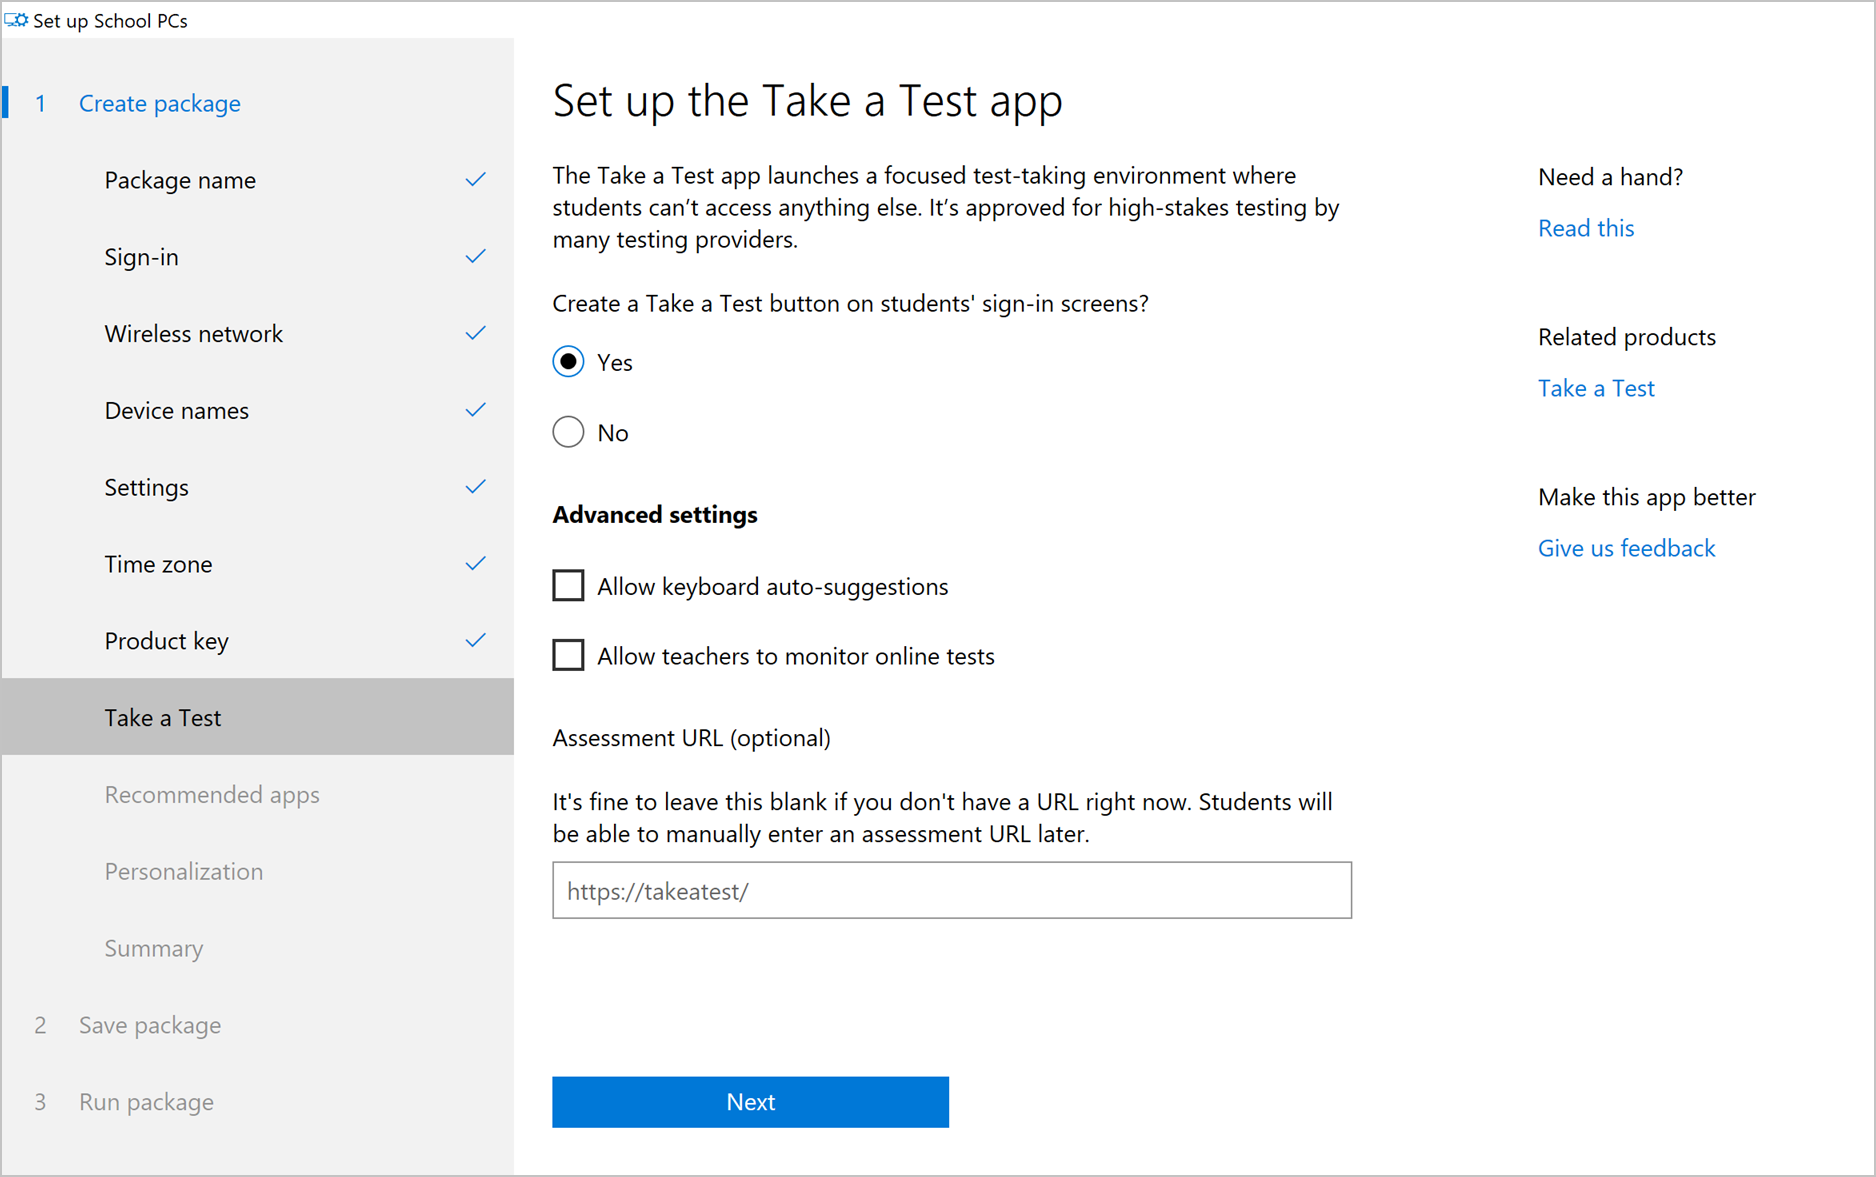 Set up Take a Test app page with "Yes" selected to create an app button. Page also has two checkboxes for additional settings and one text field for the assessment URL.